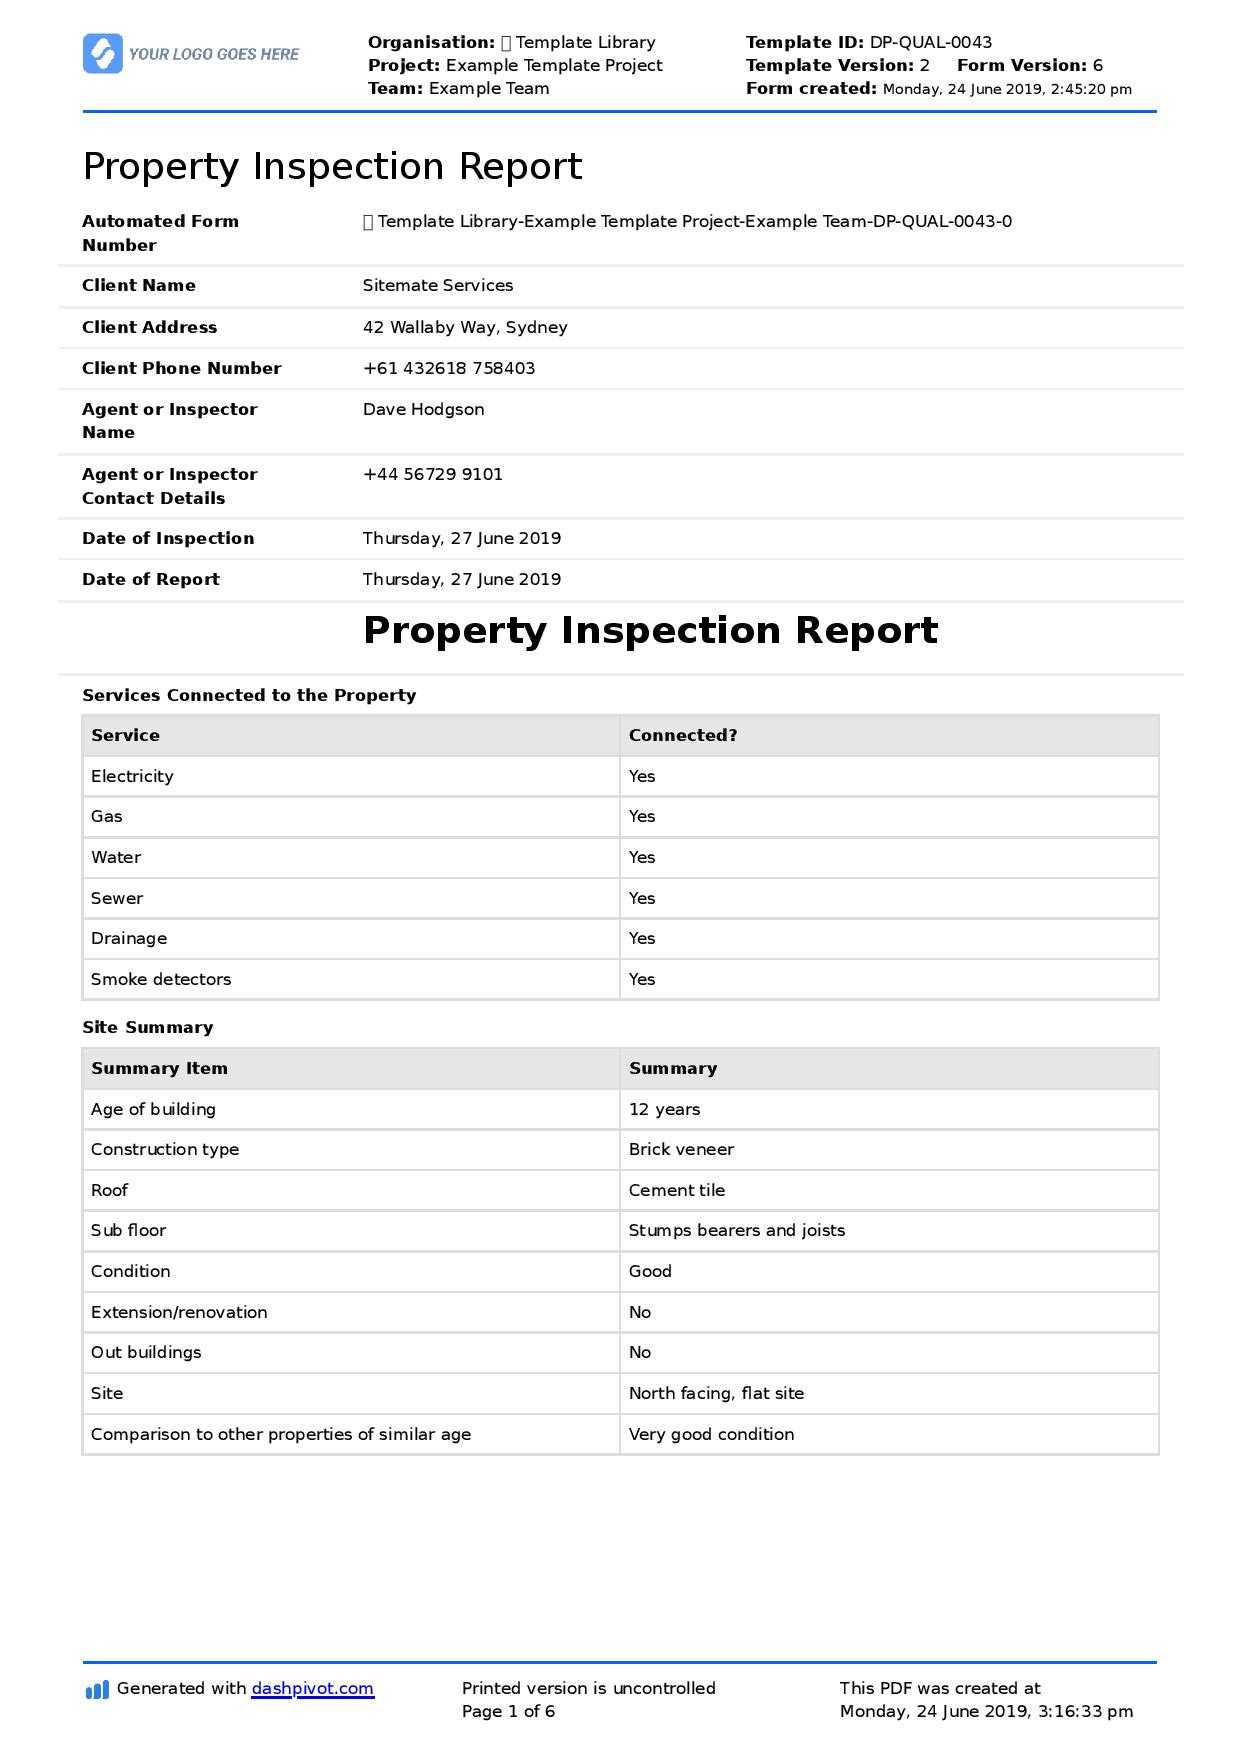 Property Inspection Report Template (Free And Customisable) With Regard To Daily Inspection Report Template